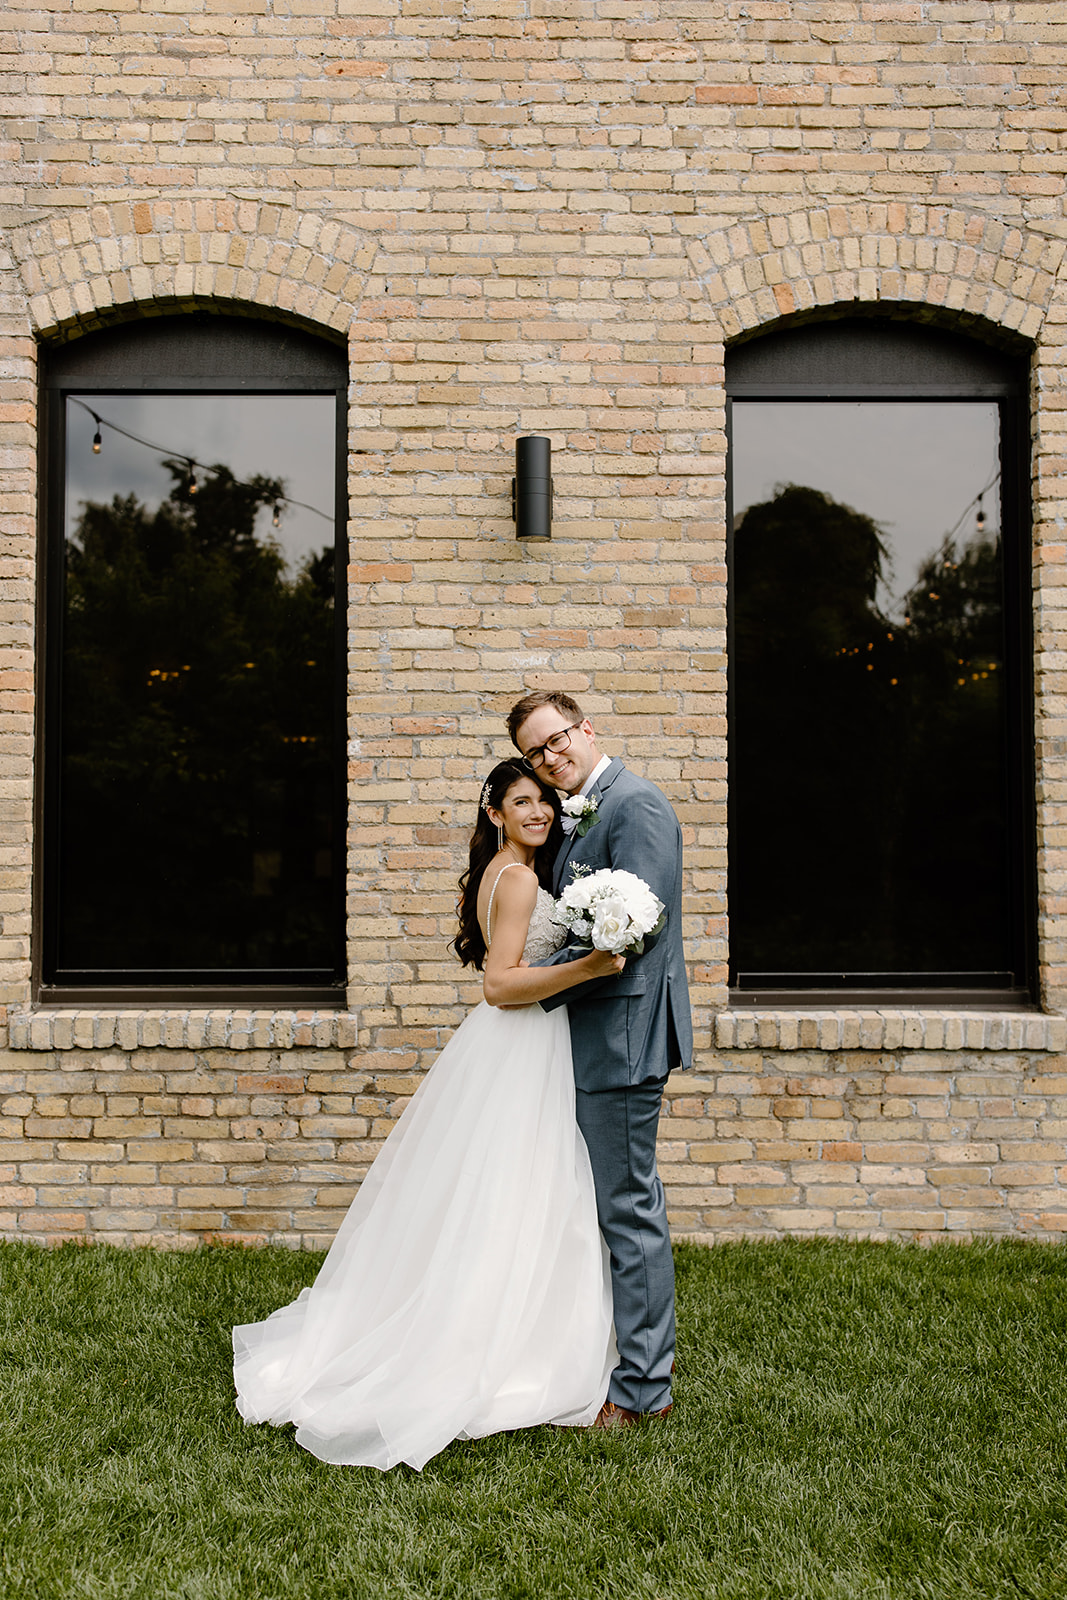 Bride and groom smile in front of a brick wall with black windows